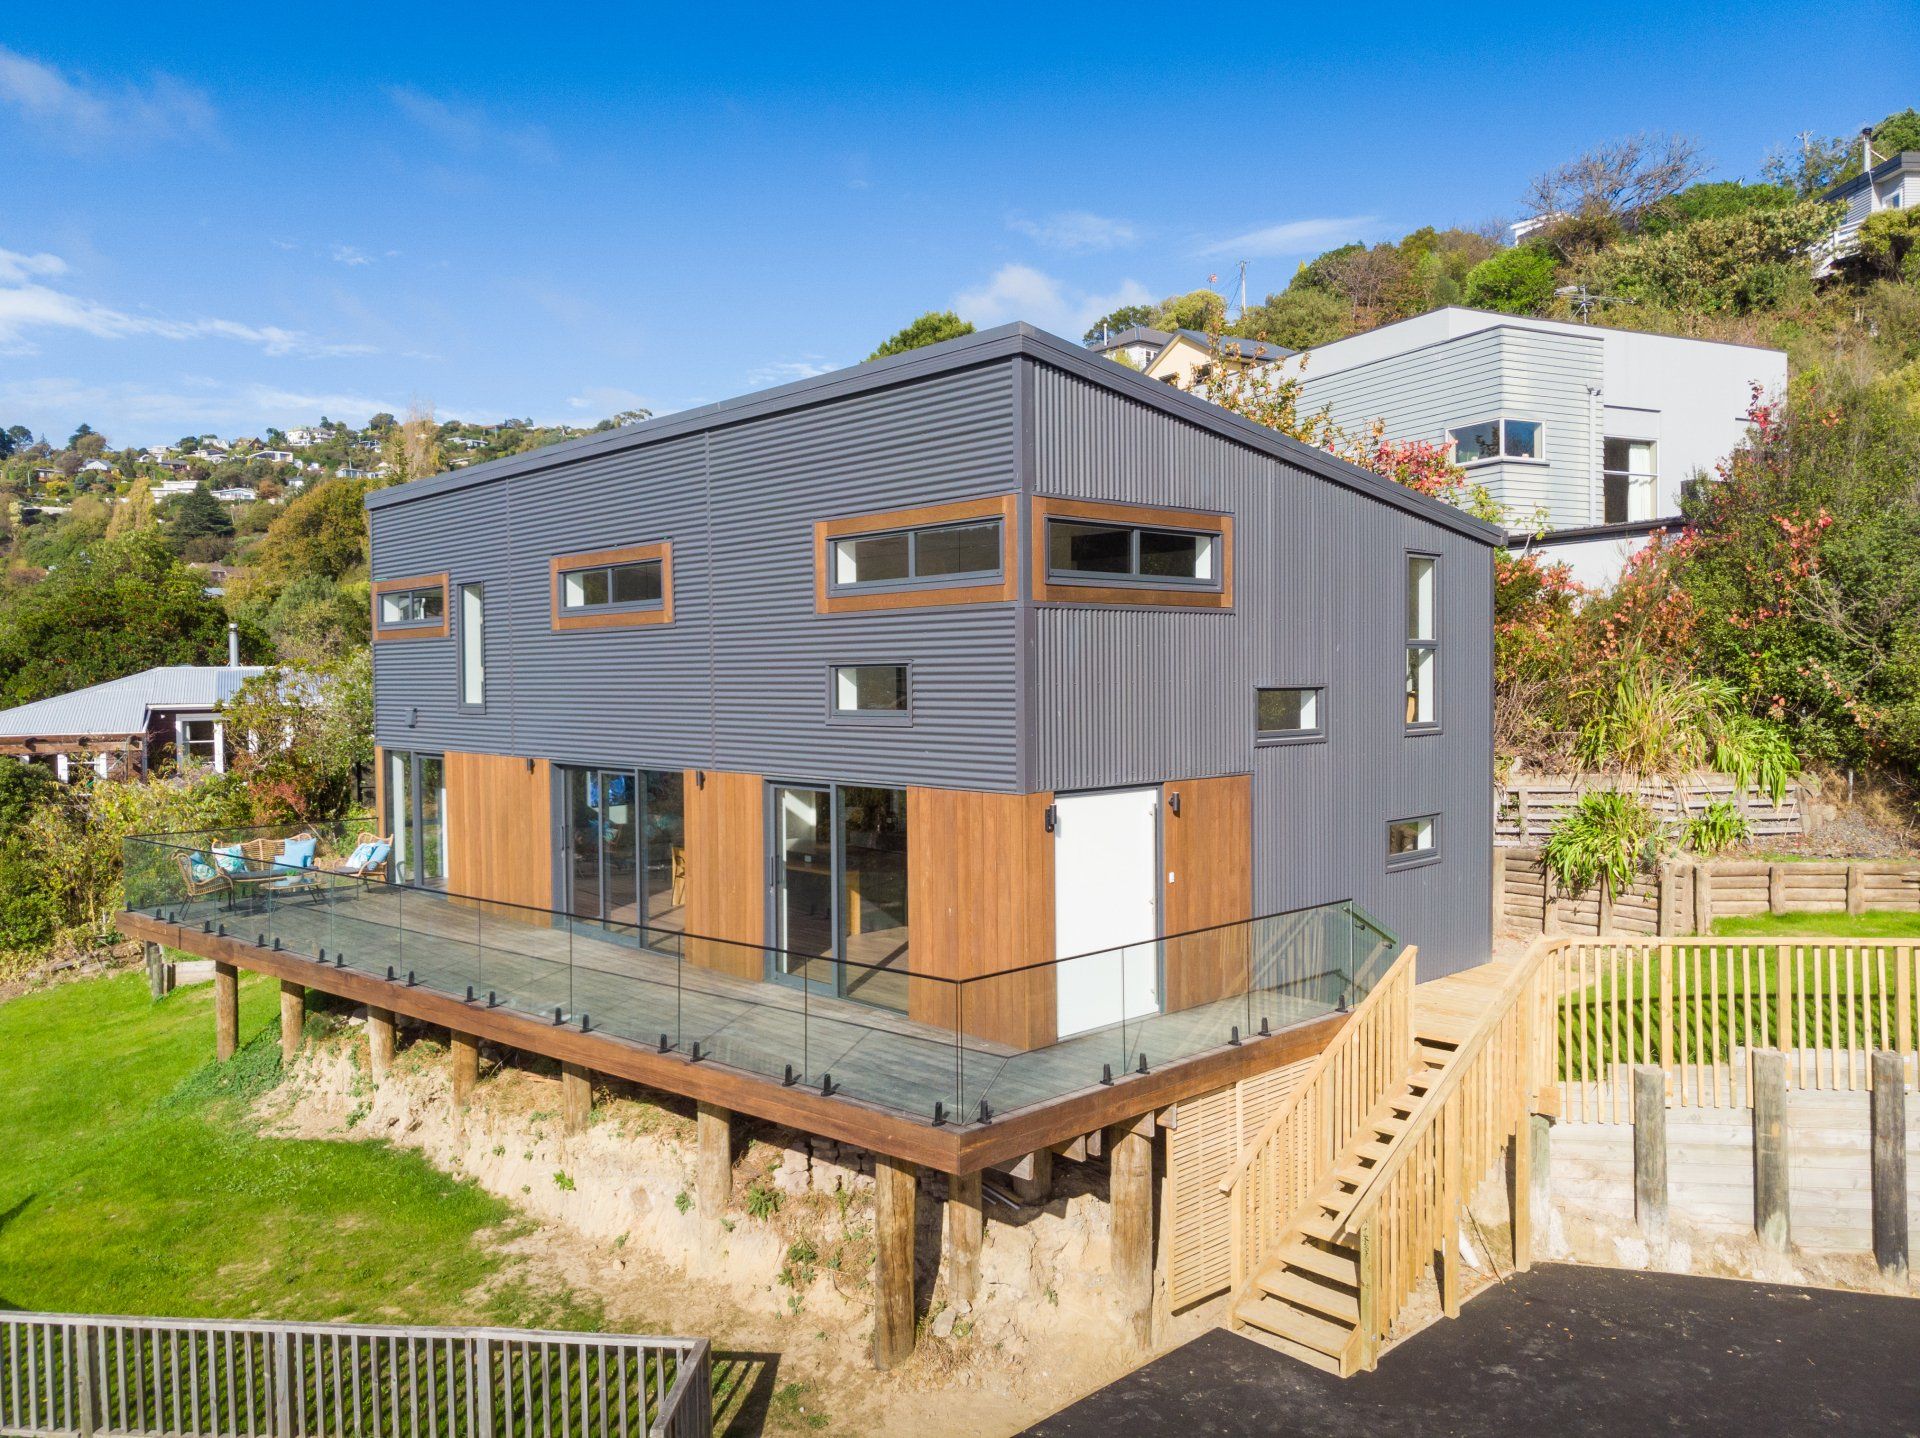 Energy efficient home, based on Passive House Standards, built on a hill site in Christchurch